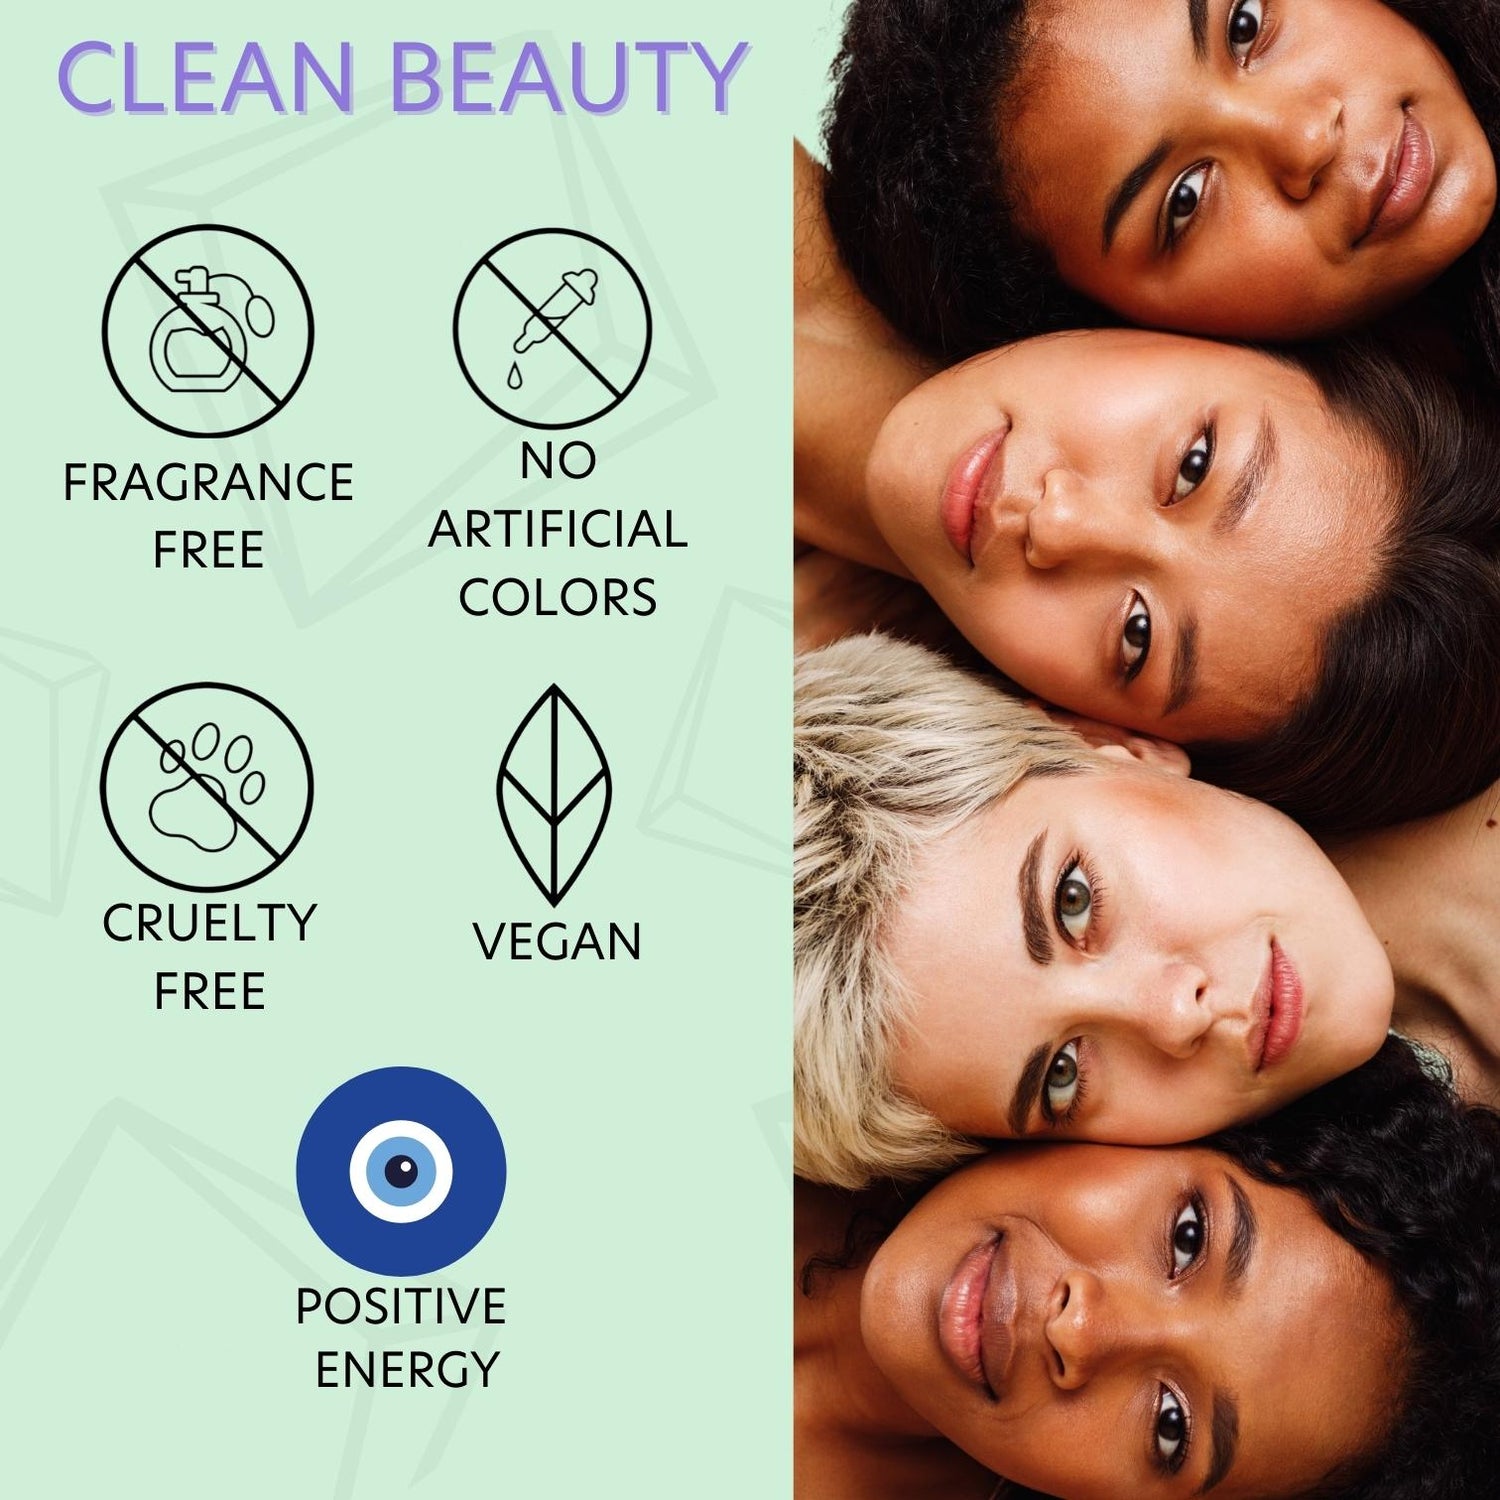 GEM PWR believes in clean beauty and positive energy